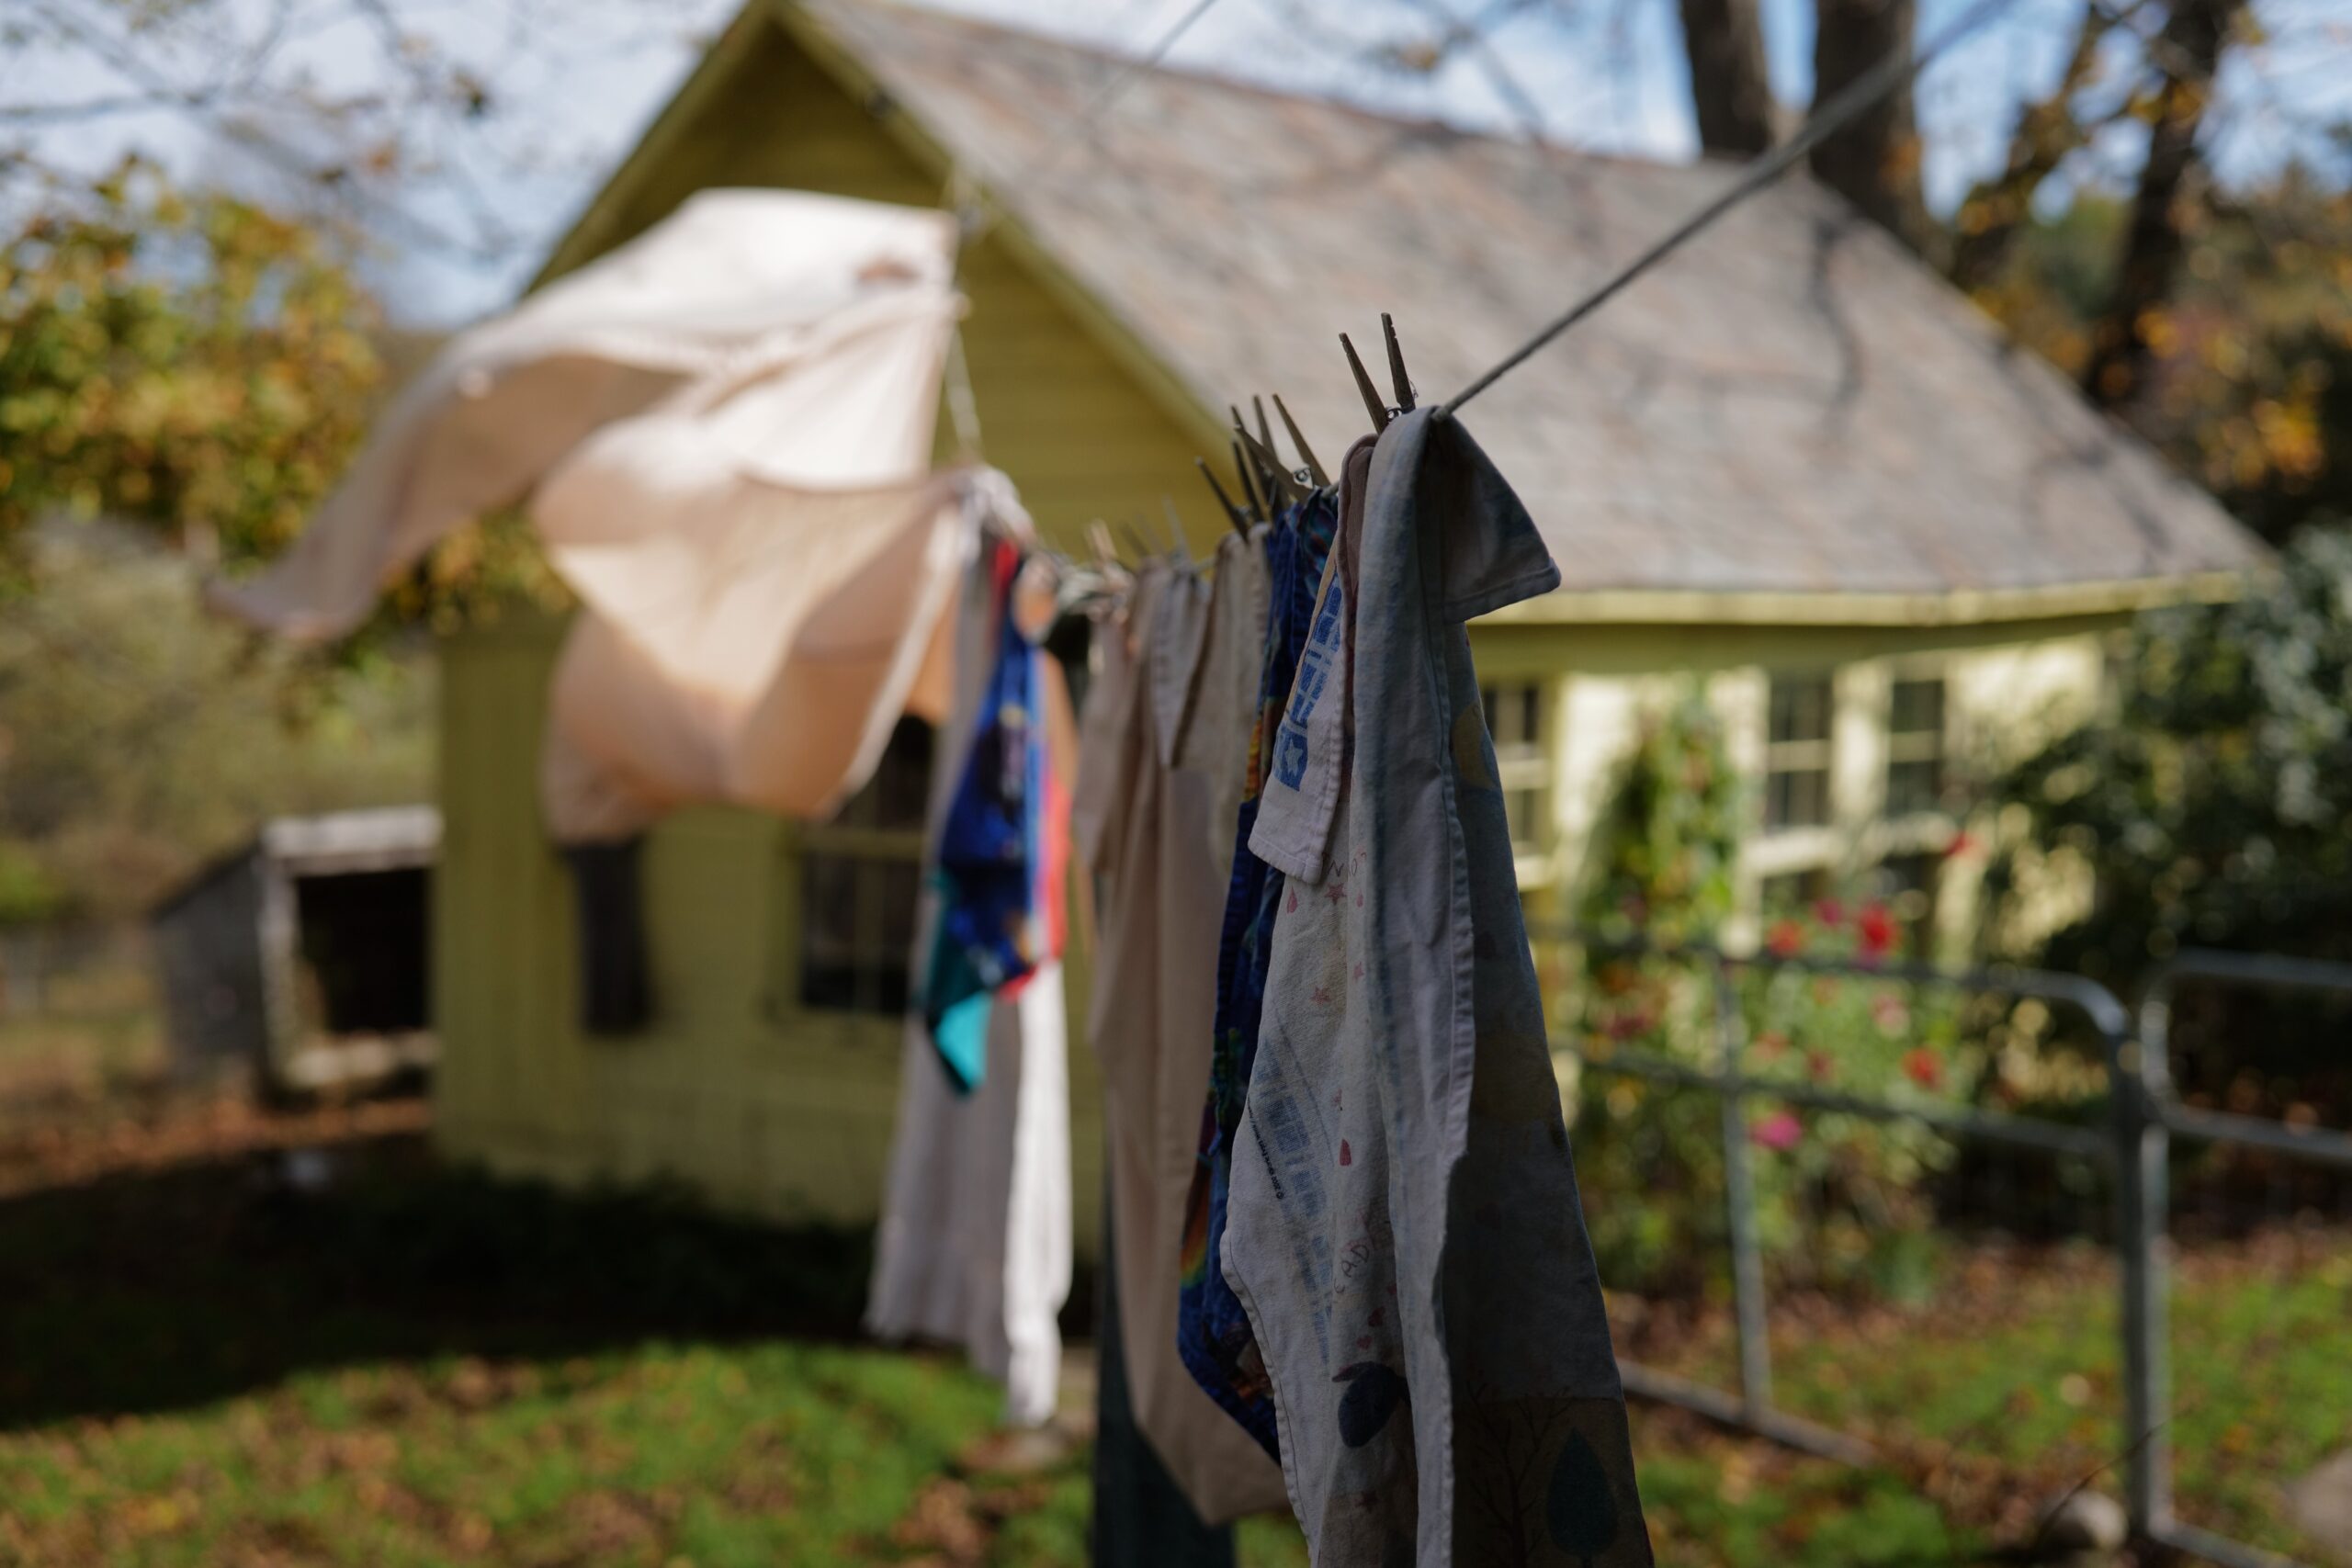 Hail The Humble Clothesline. One Of My Favorite Weekly Photographs - Bedlam  Farm